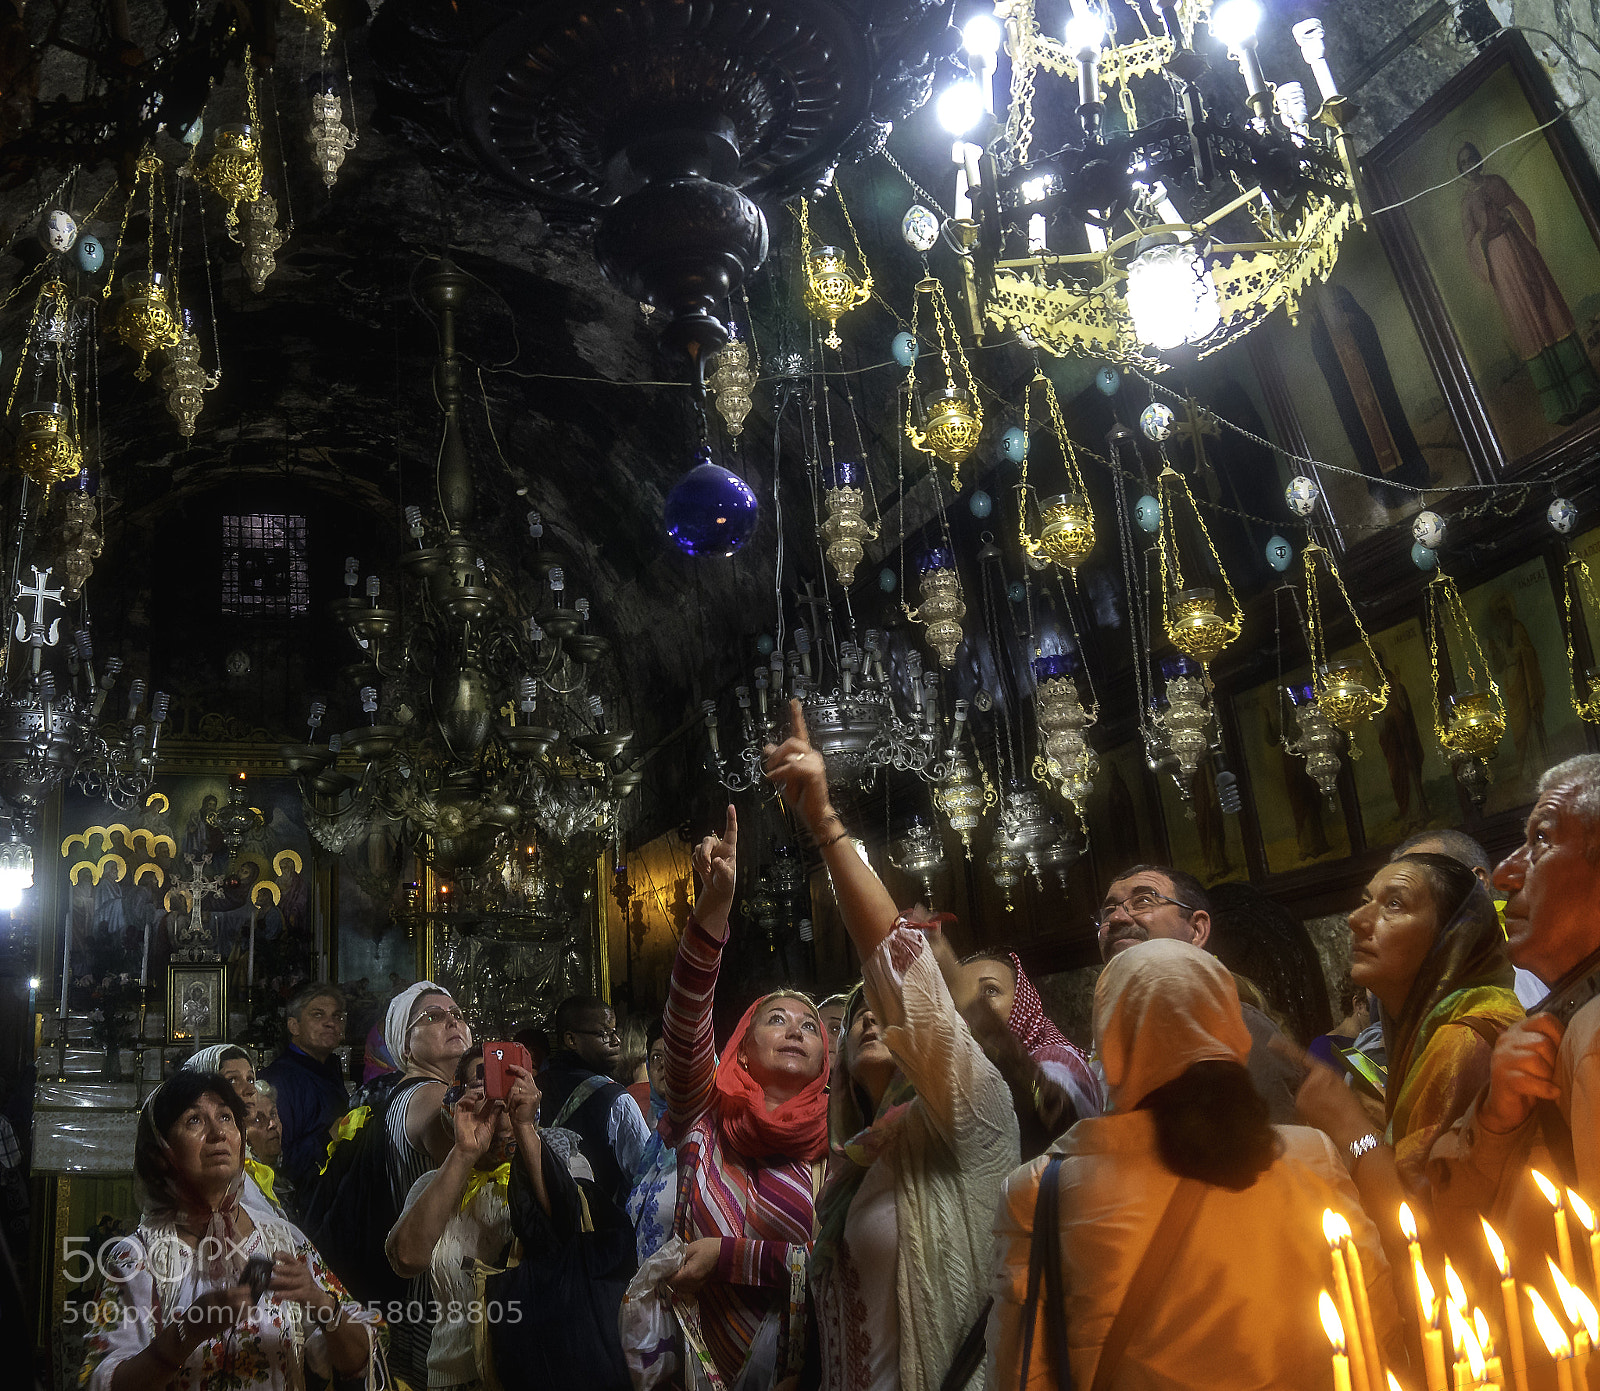 Sony a6300 sample photo. Pilgrims in the holy photography